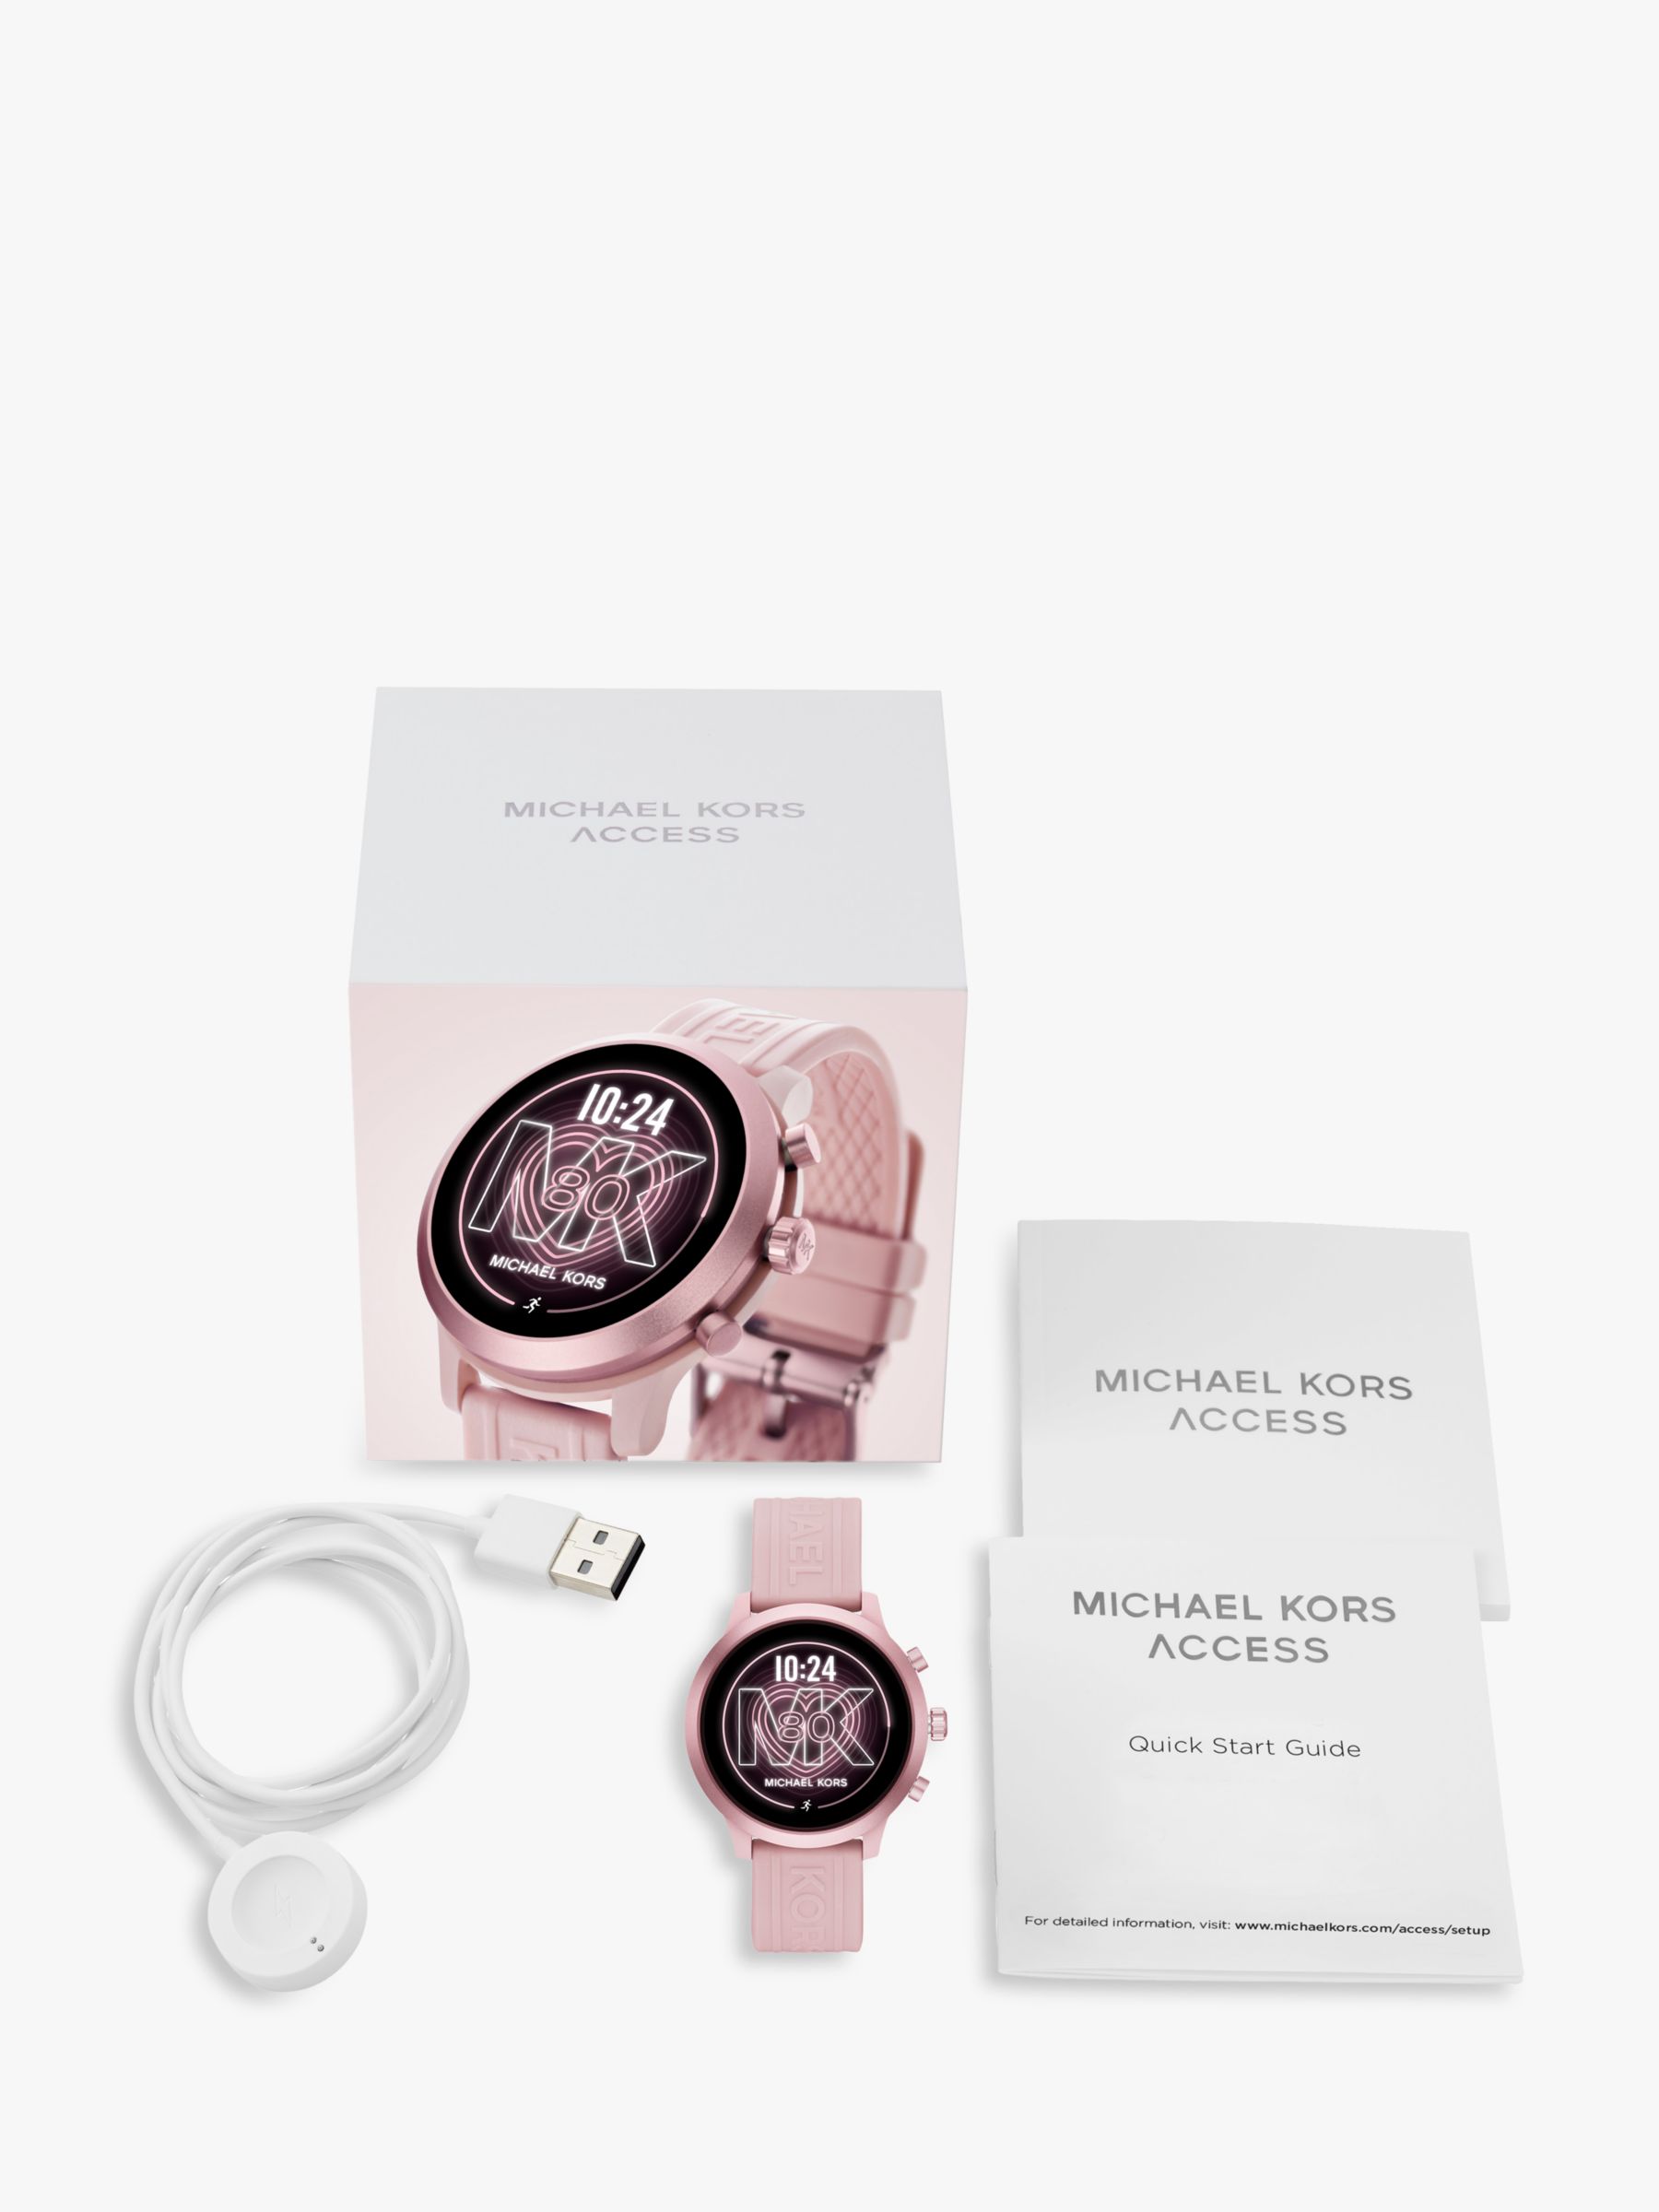 mk watch rose gold touch screen